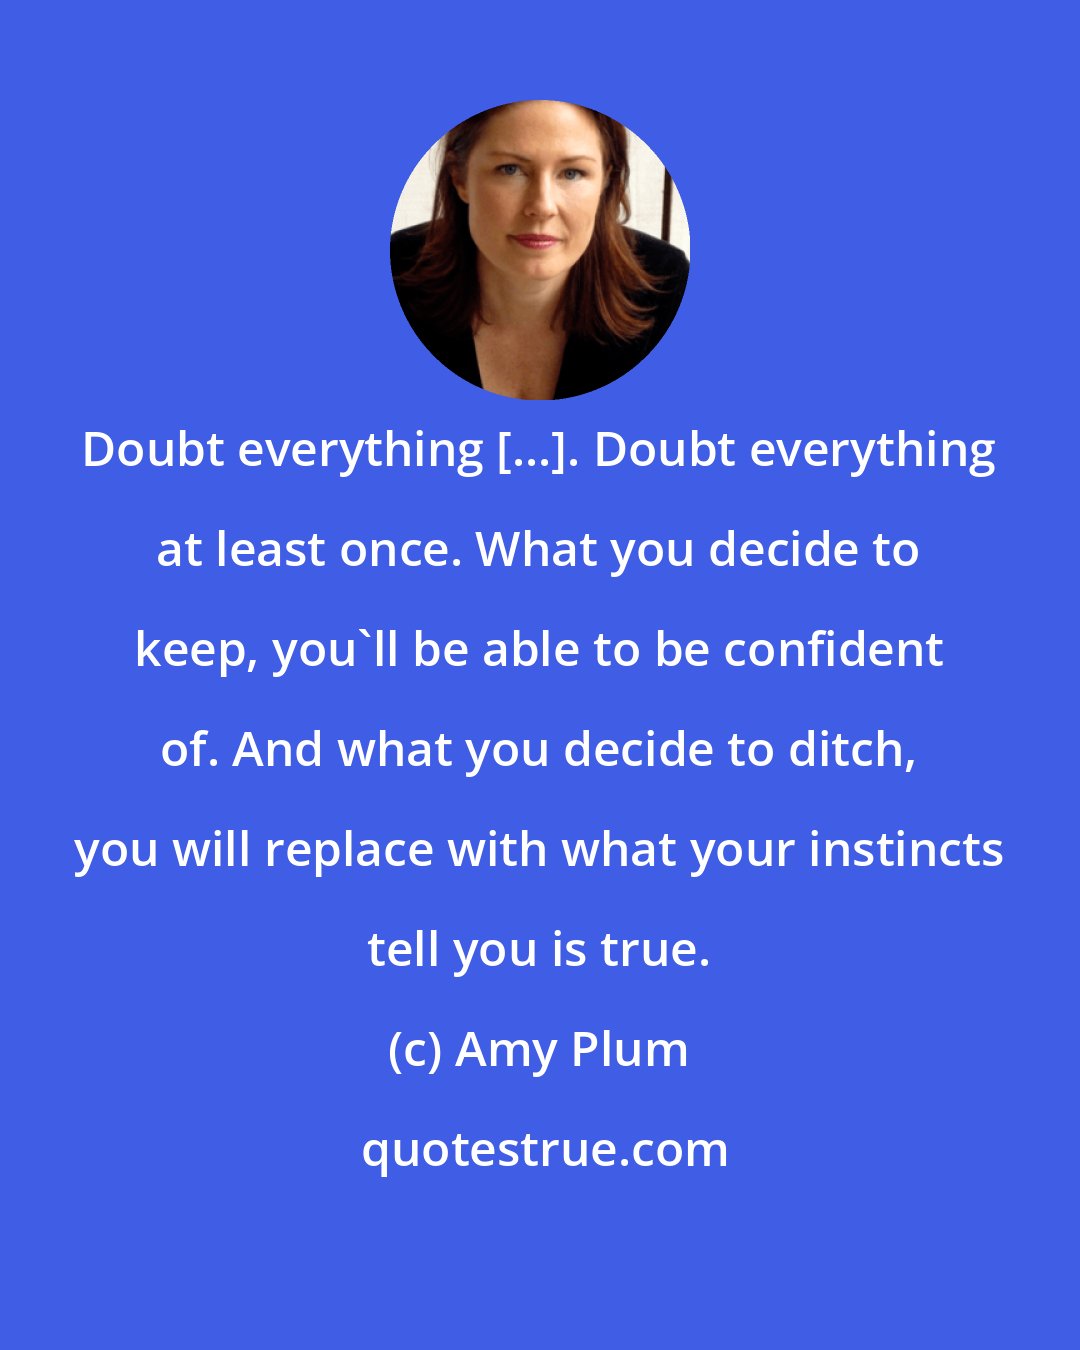 Amy Plum: Doubt everything [...]. Doubt everything at least once. What you decide to keep, you'll be able to be confident of. And what you decide to ditch, you will replace with what your instincts tell you is true.